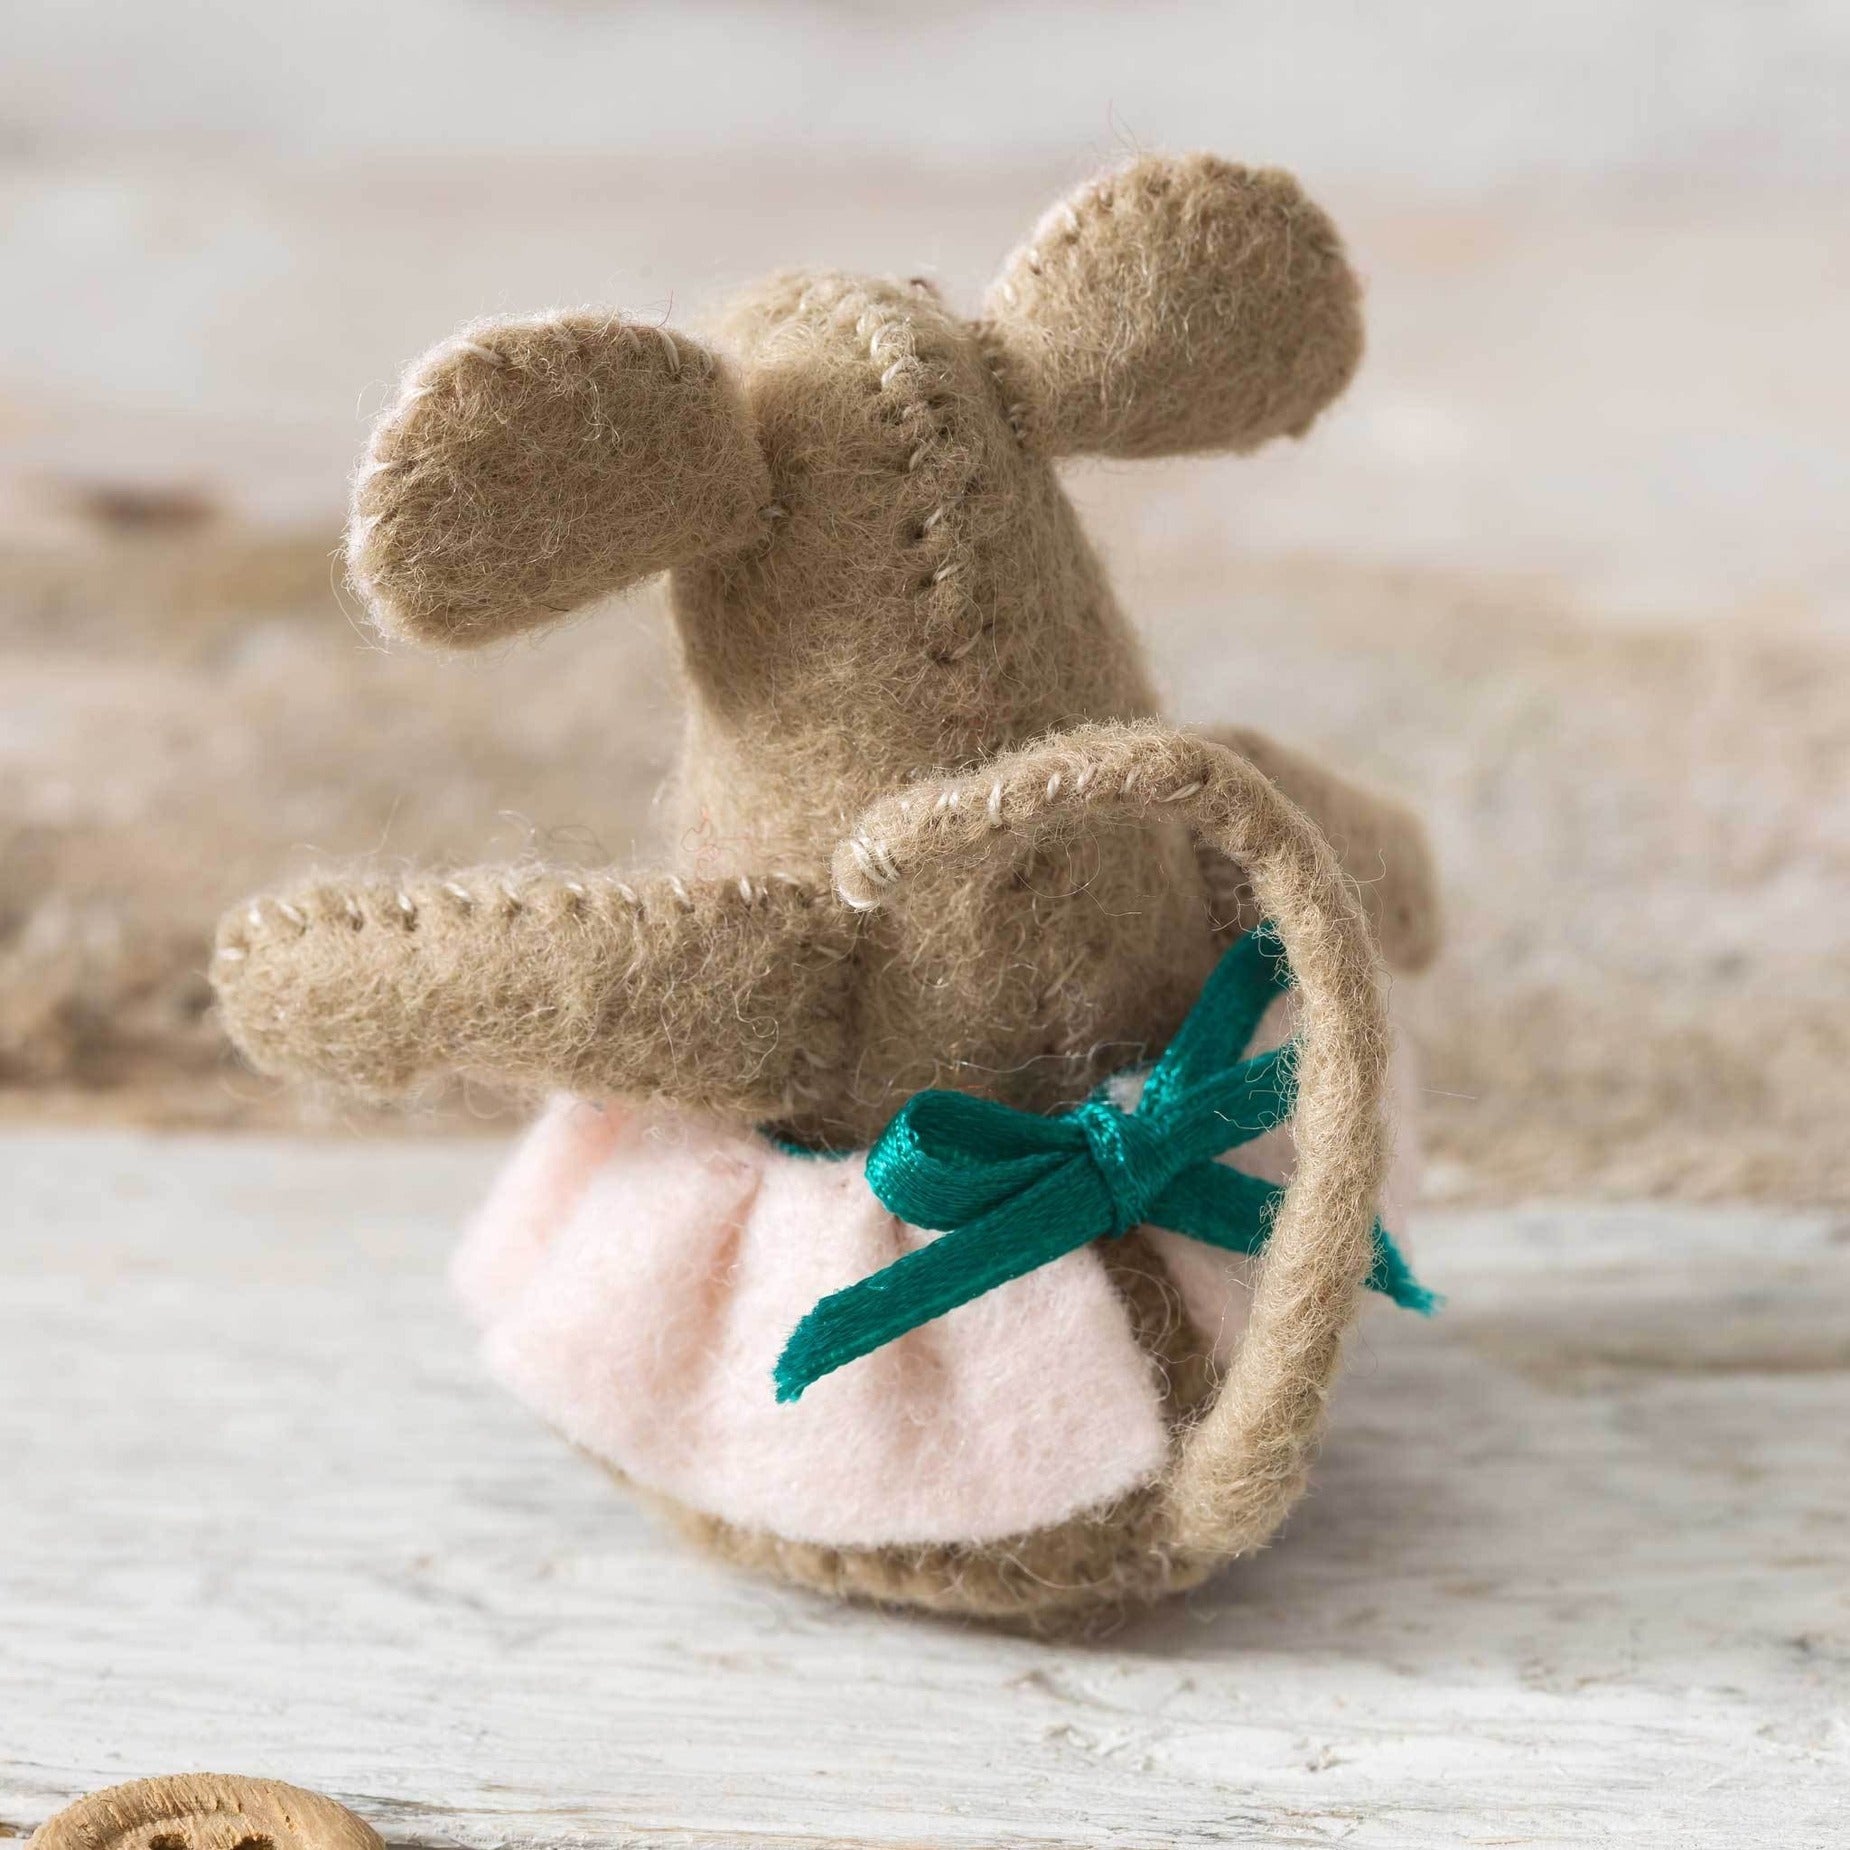 Handmade beige felt mouse, back view, showcasing delicate stitchwork and a pink dress accented with a vibrant emerald green bow, set on a rustic wooden backdrop.